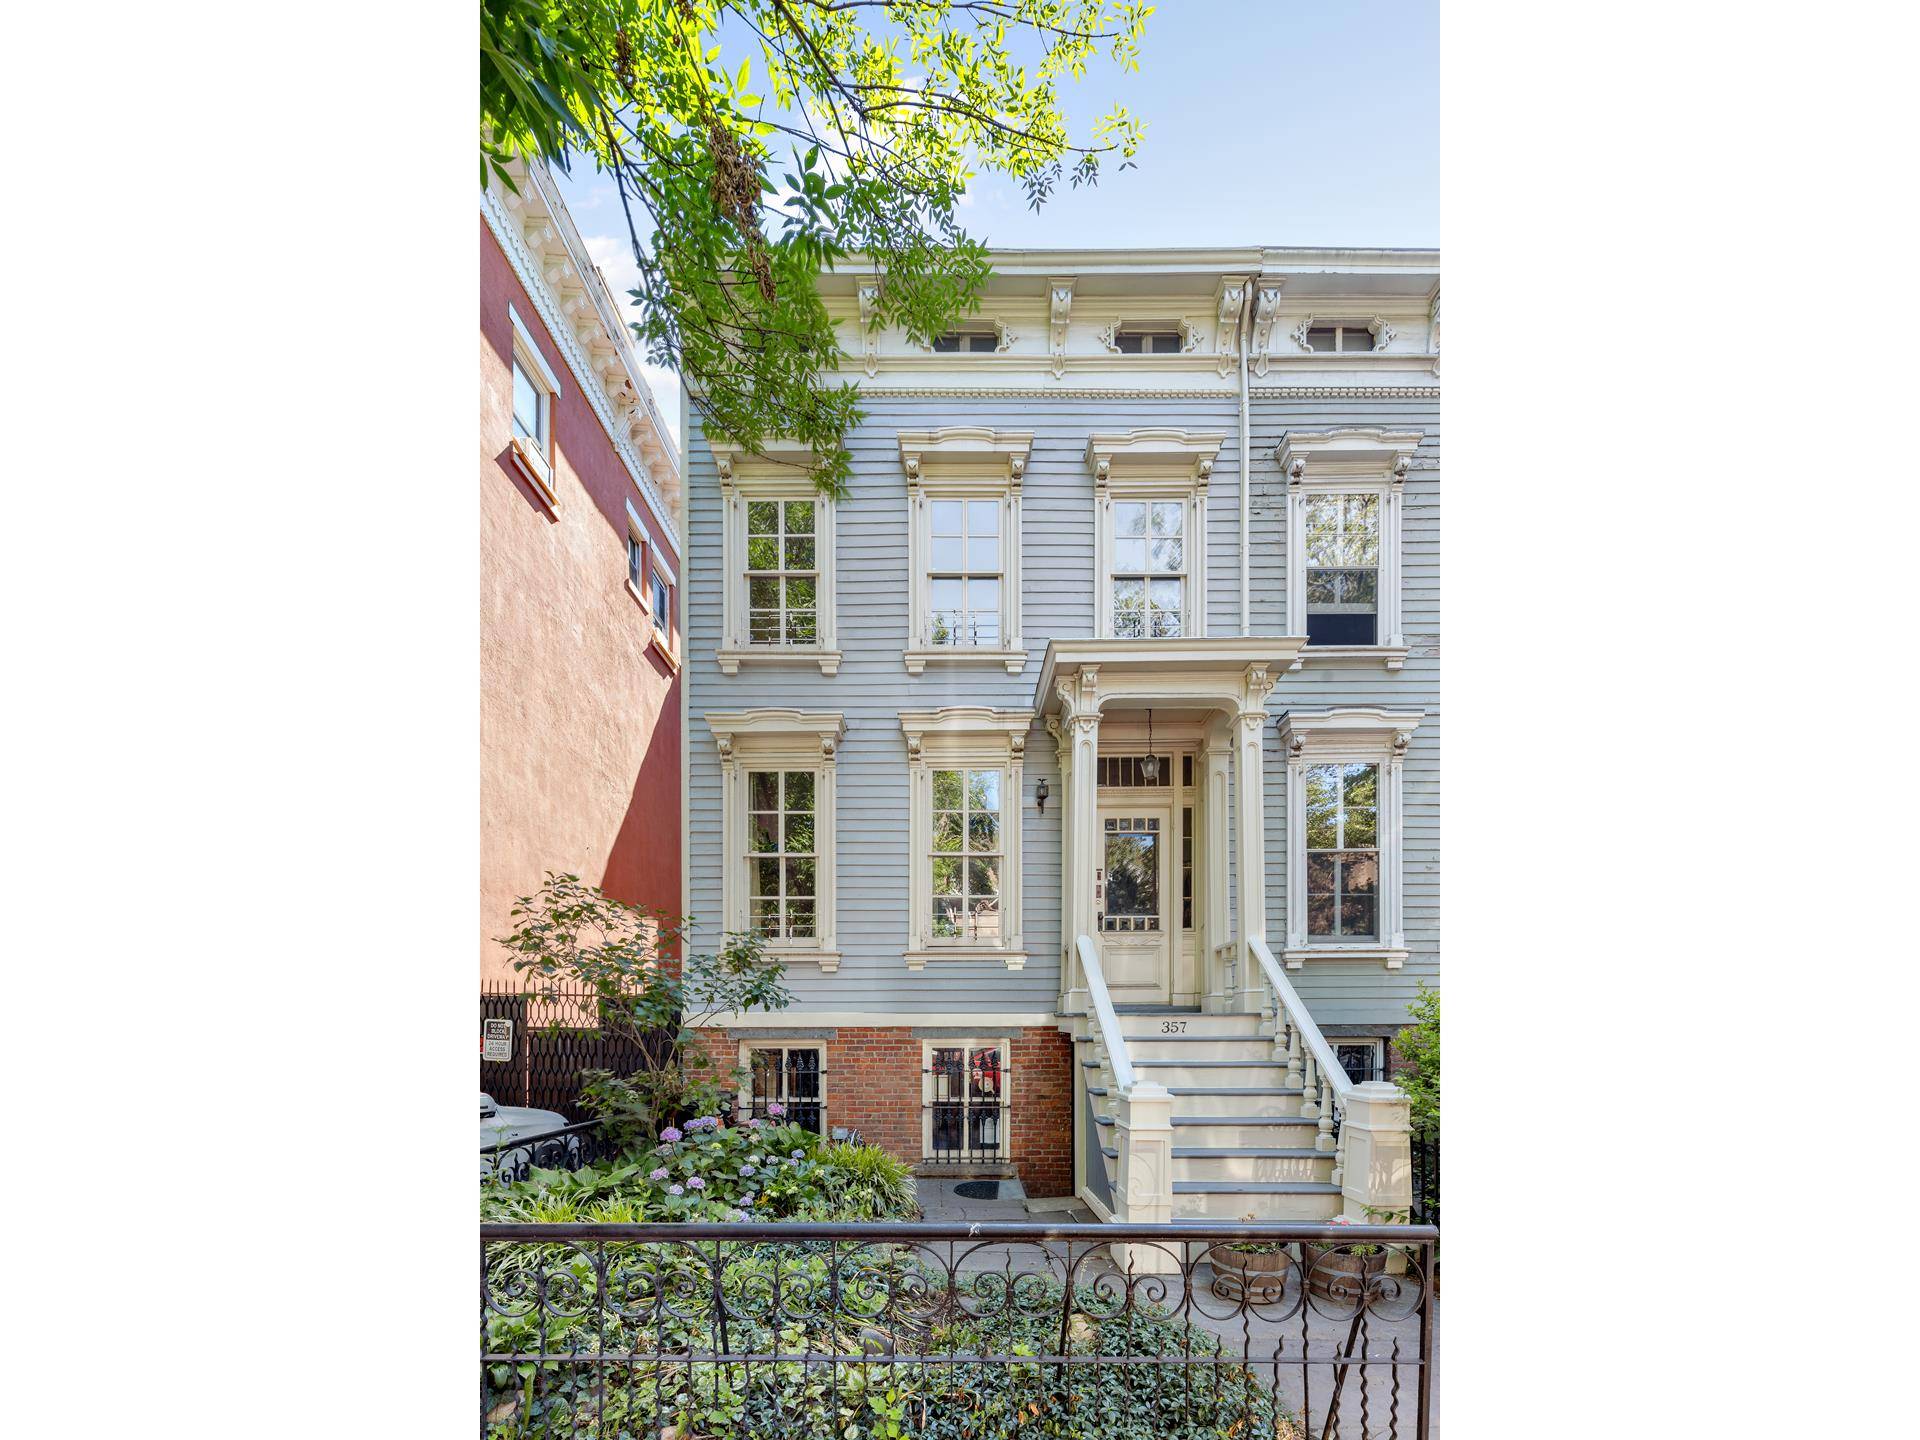 357 Washington is a very special, wood framed Italianate built in 1860 possibly by architect Ebenezer L.